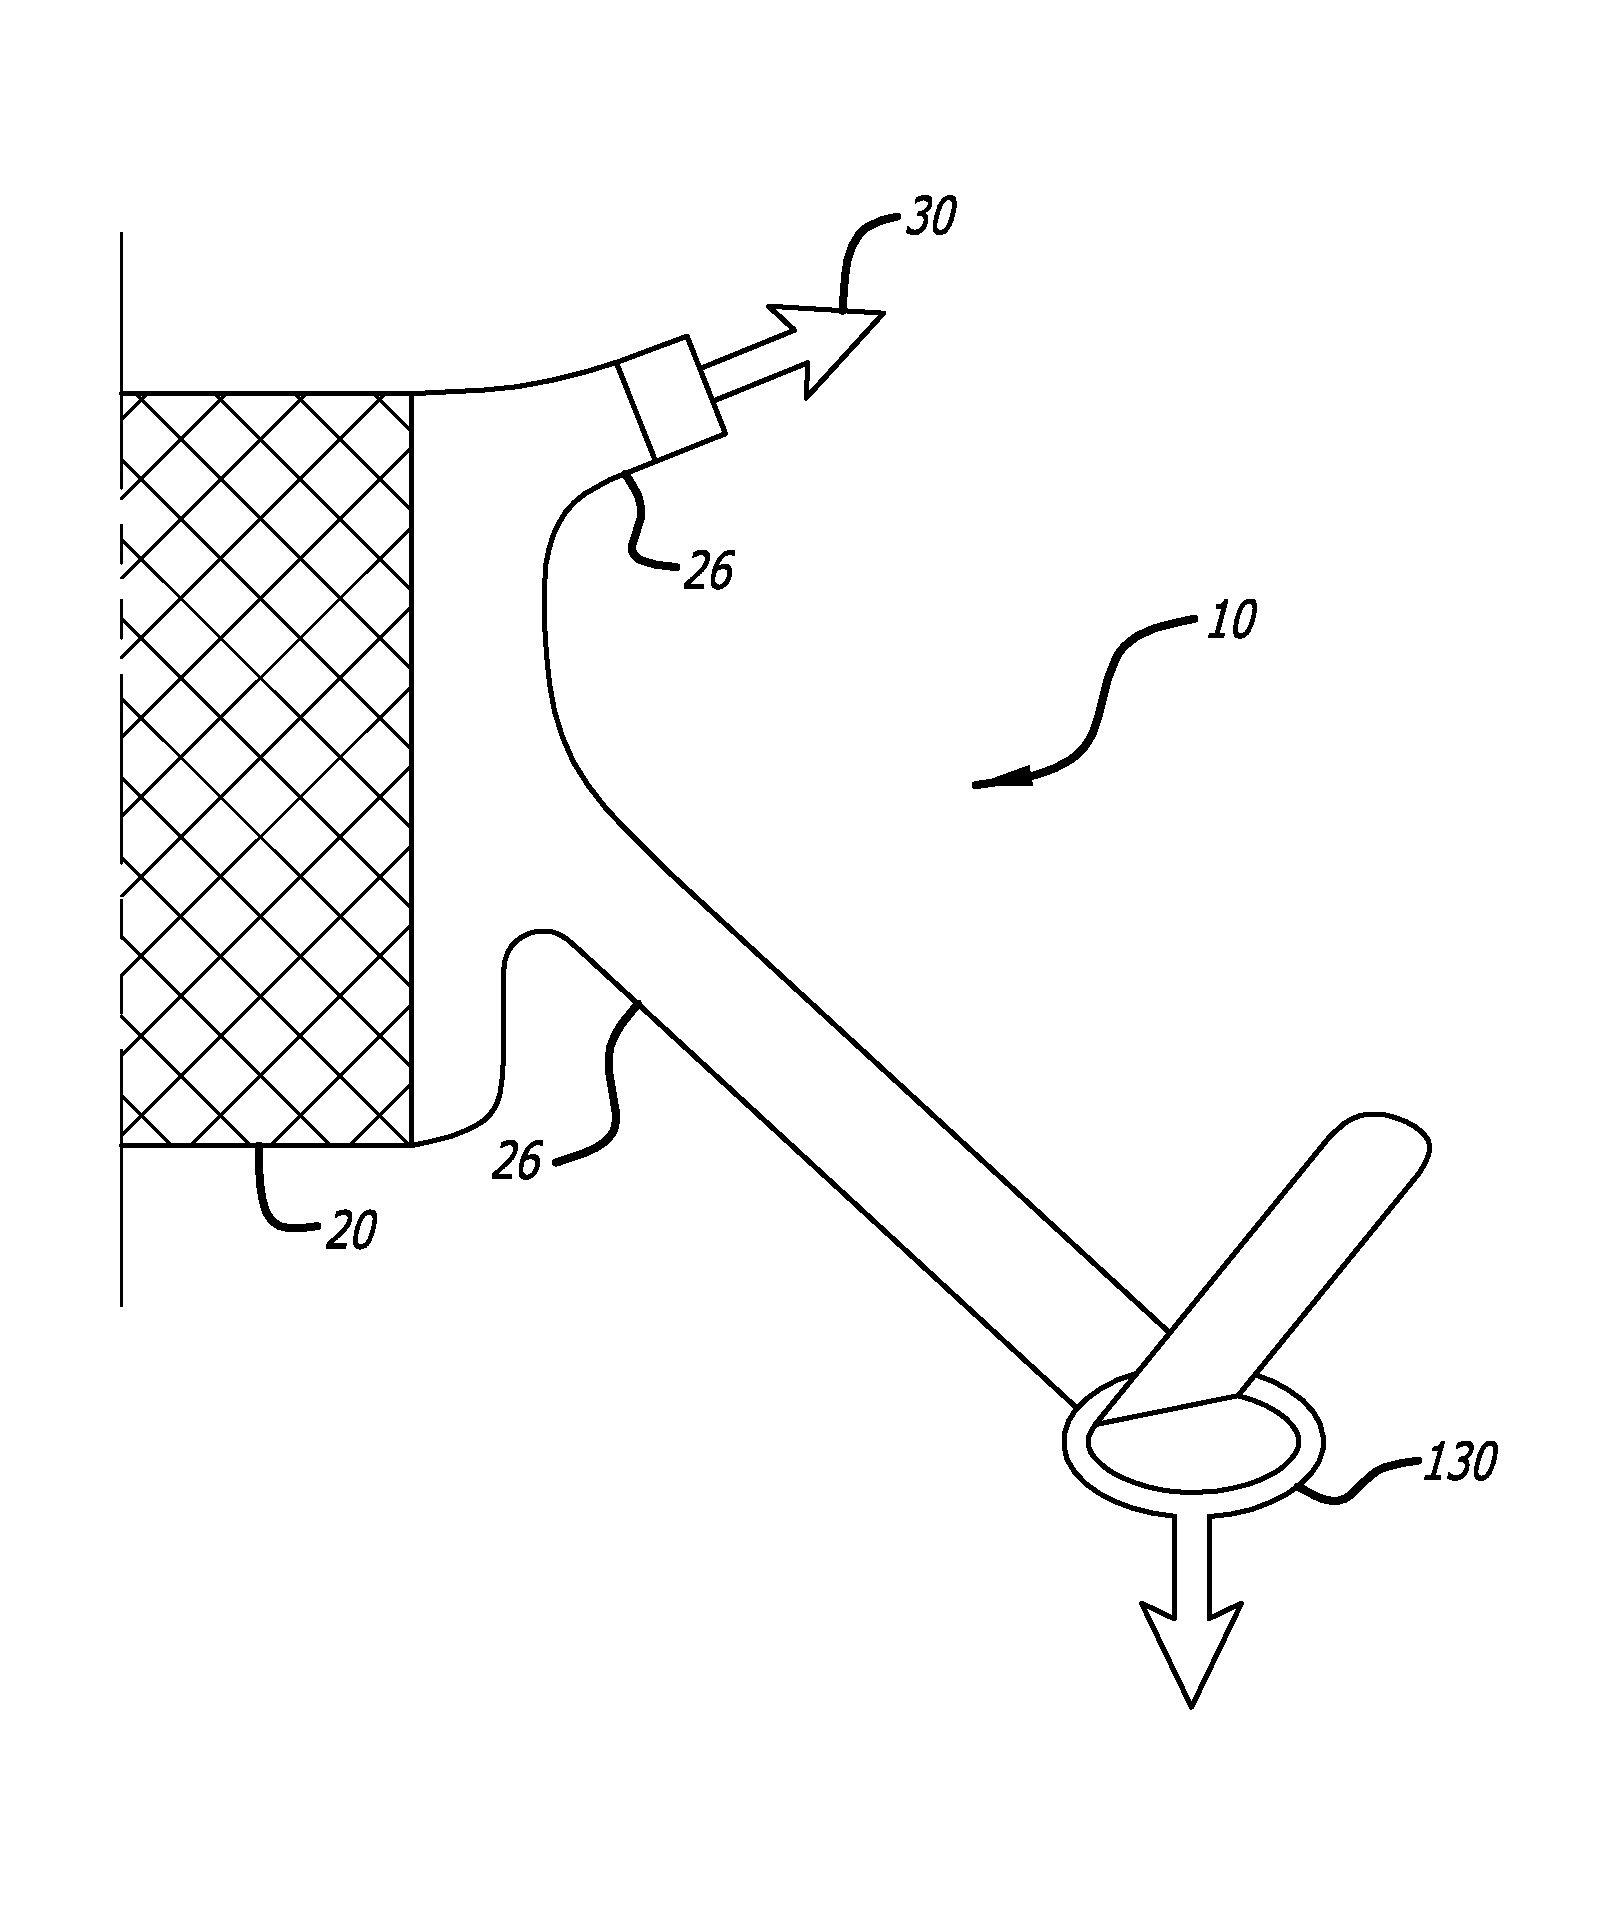 Implants And Procedures For Supporting Anatomical Structures For Treating Conditions Such As Pelvic Organ Prolapse